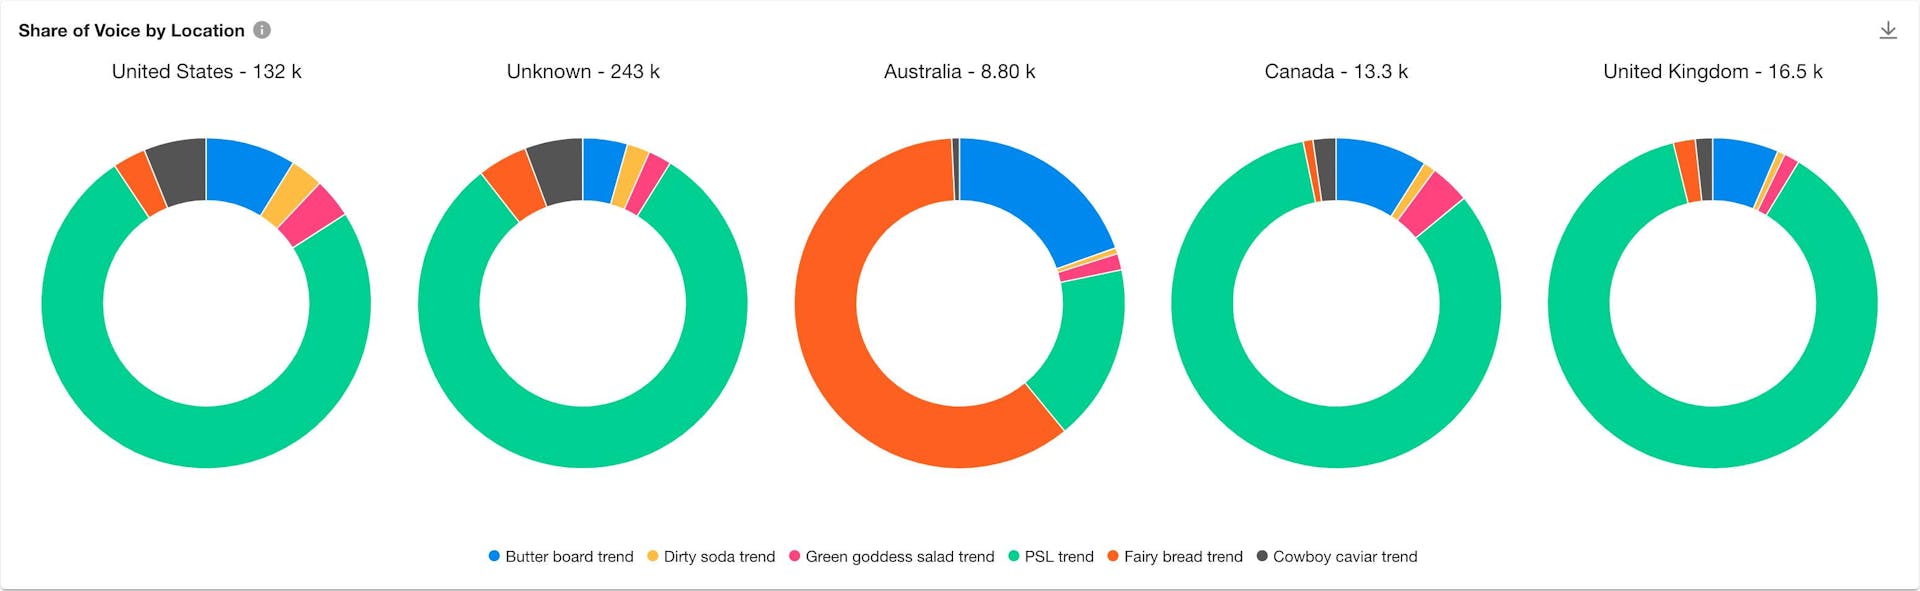 Screenshot from the Meltwater social listening platform of ring charts showing six food trends' shares of voice by location.